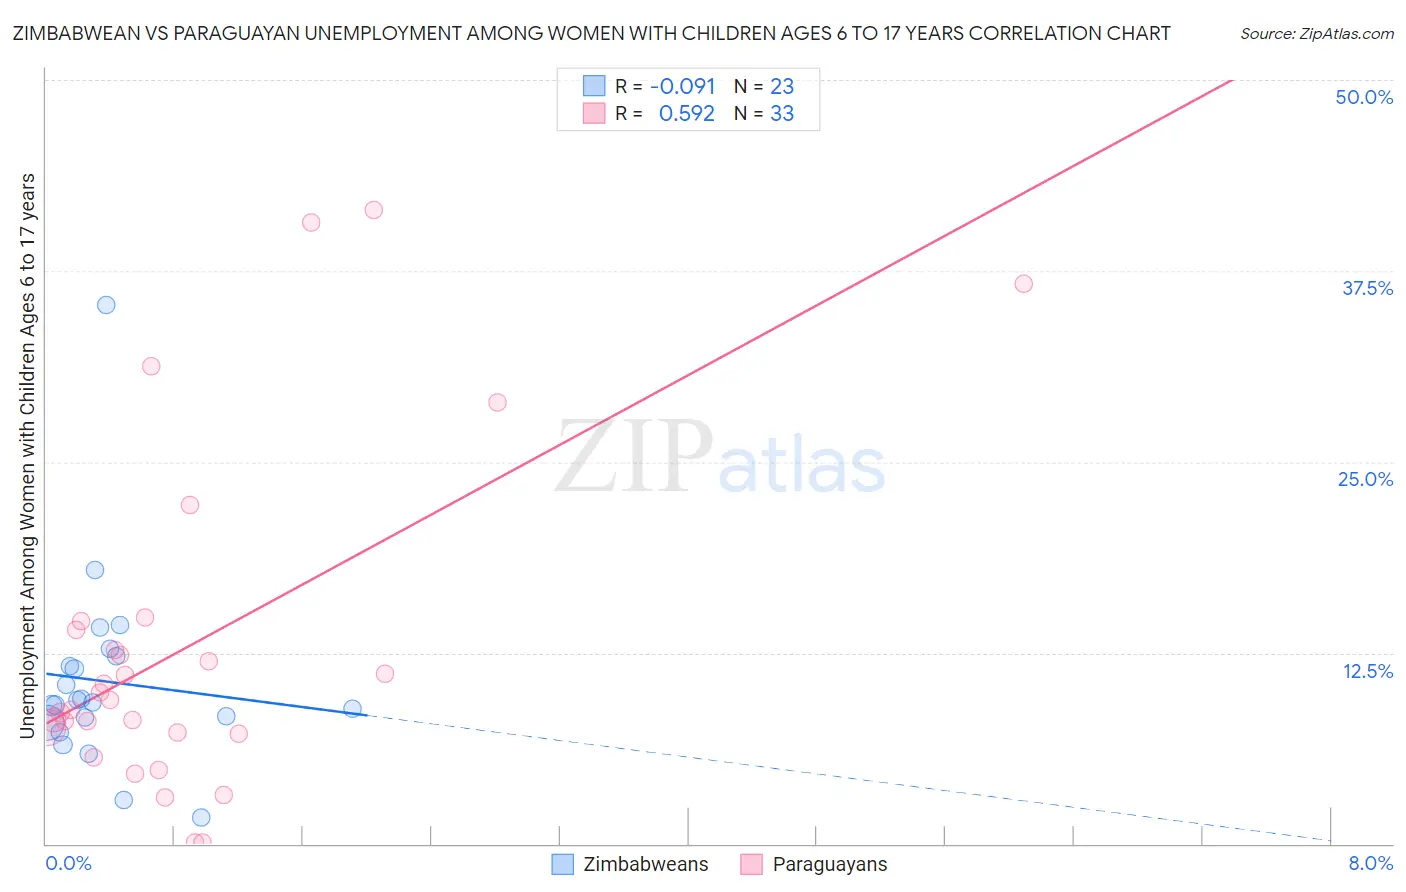 Zimbabwean vs Paraguayan Unemployment Among Women with Children Ages 6 to 17 years